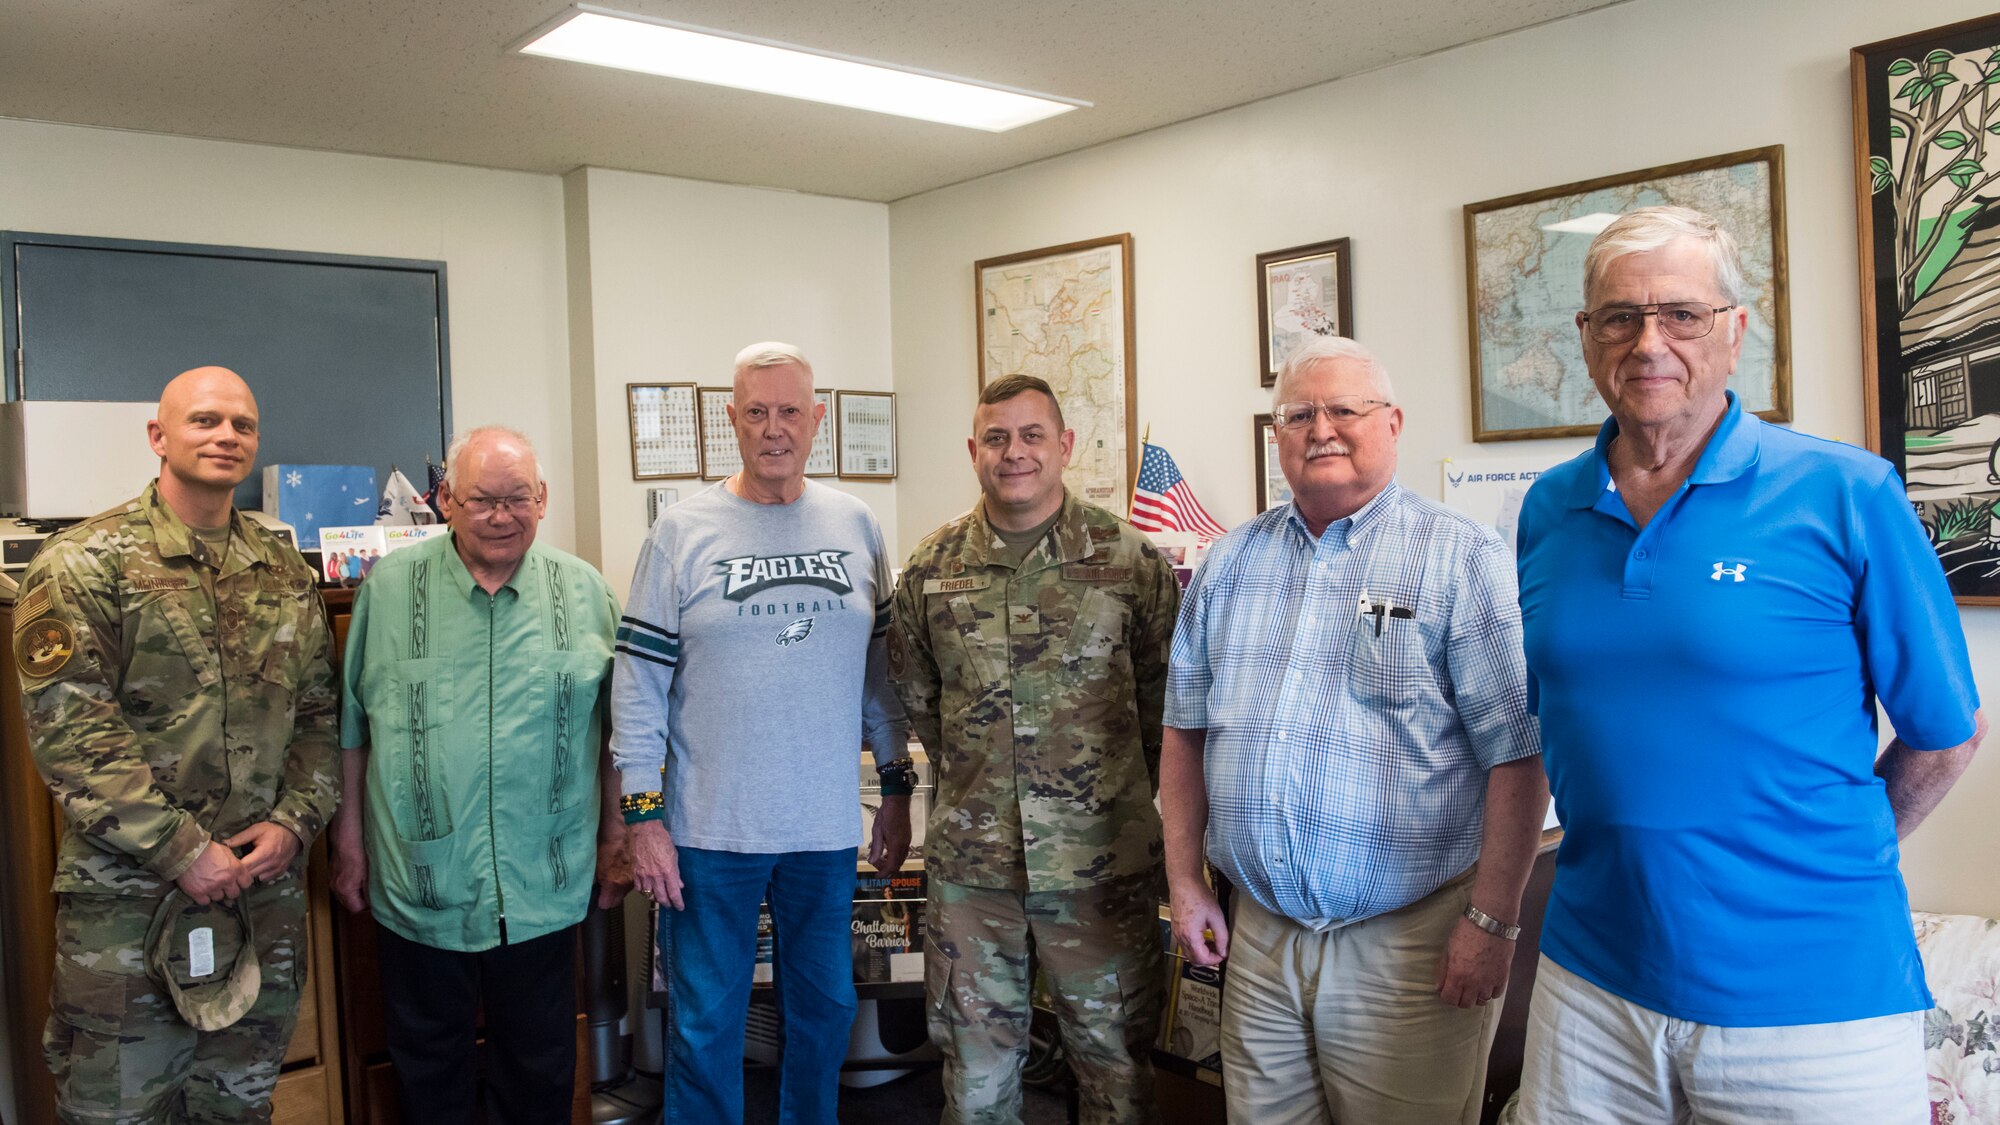 U.S. Air Force members pose for a group photo with retired military members.